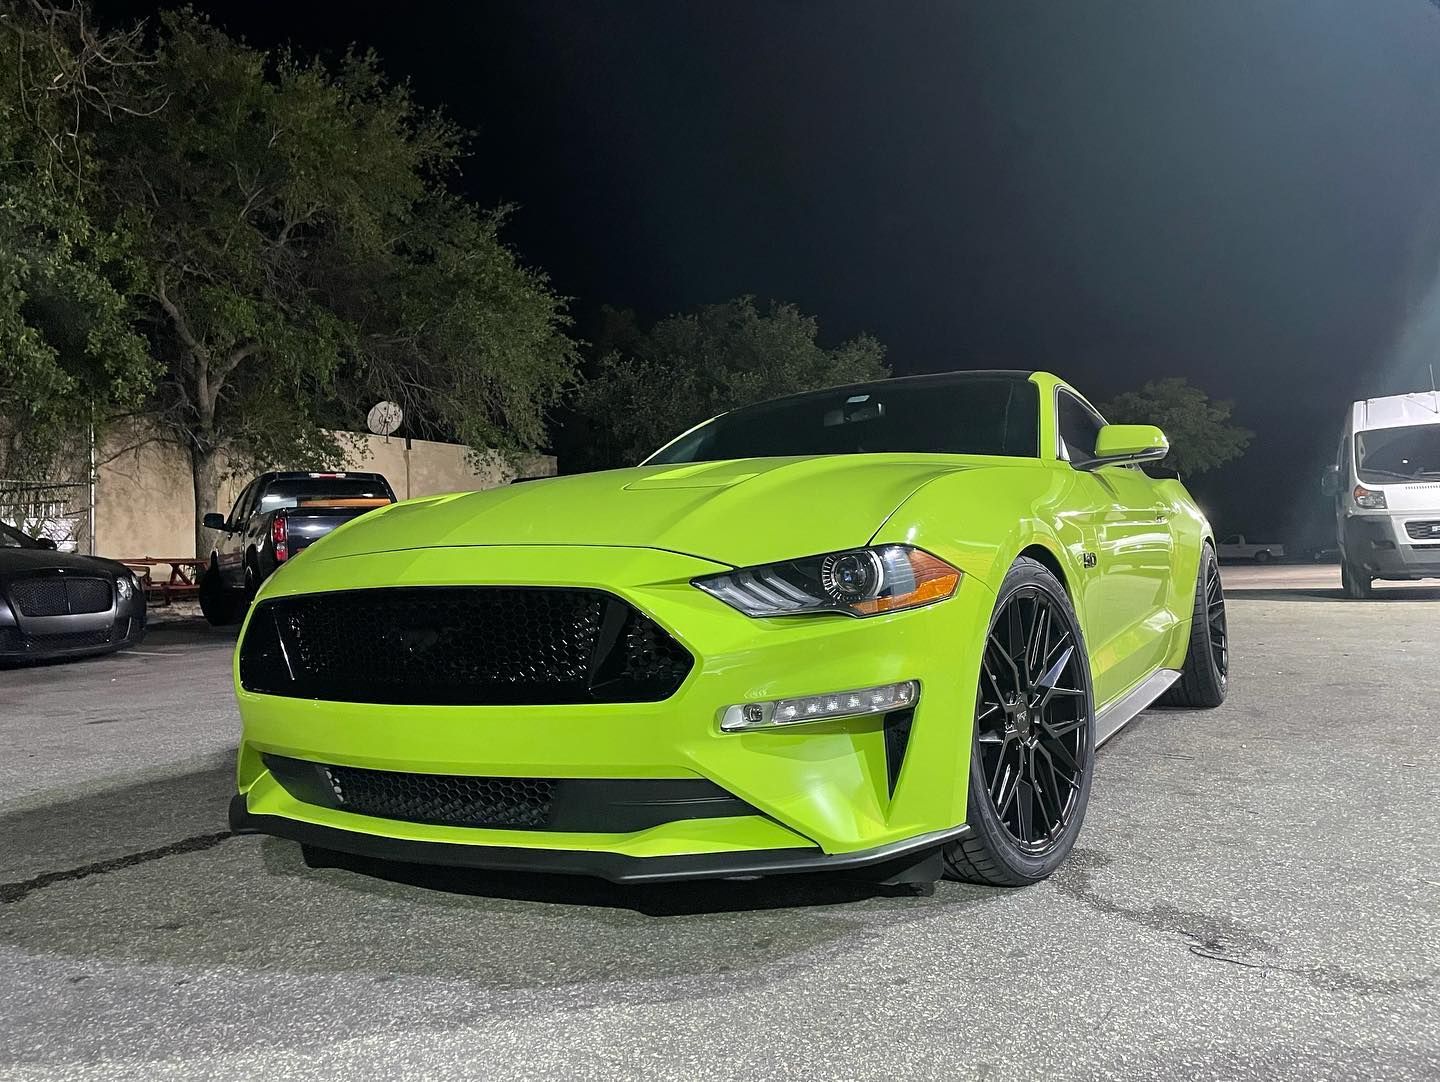 grabber-lime-mustang-gt-s550-with-niche-gamma-m190-wheels-2.jpg